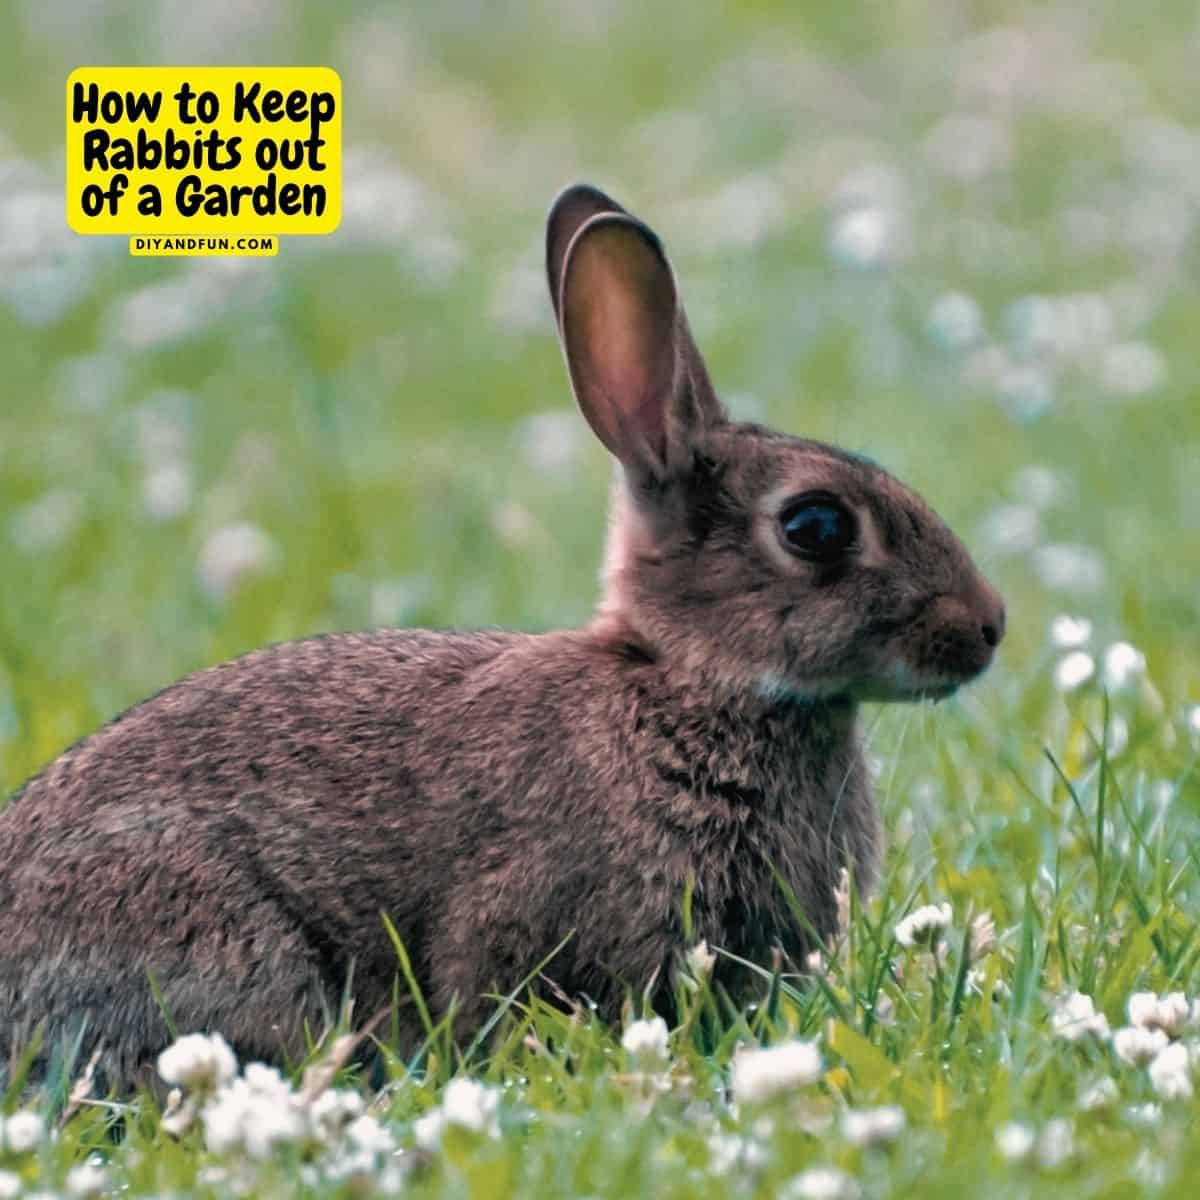 How to Keep Rabbits out of a Garden, simple and humane methods for preventing rabbits from entering your vegetable or flower garden.